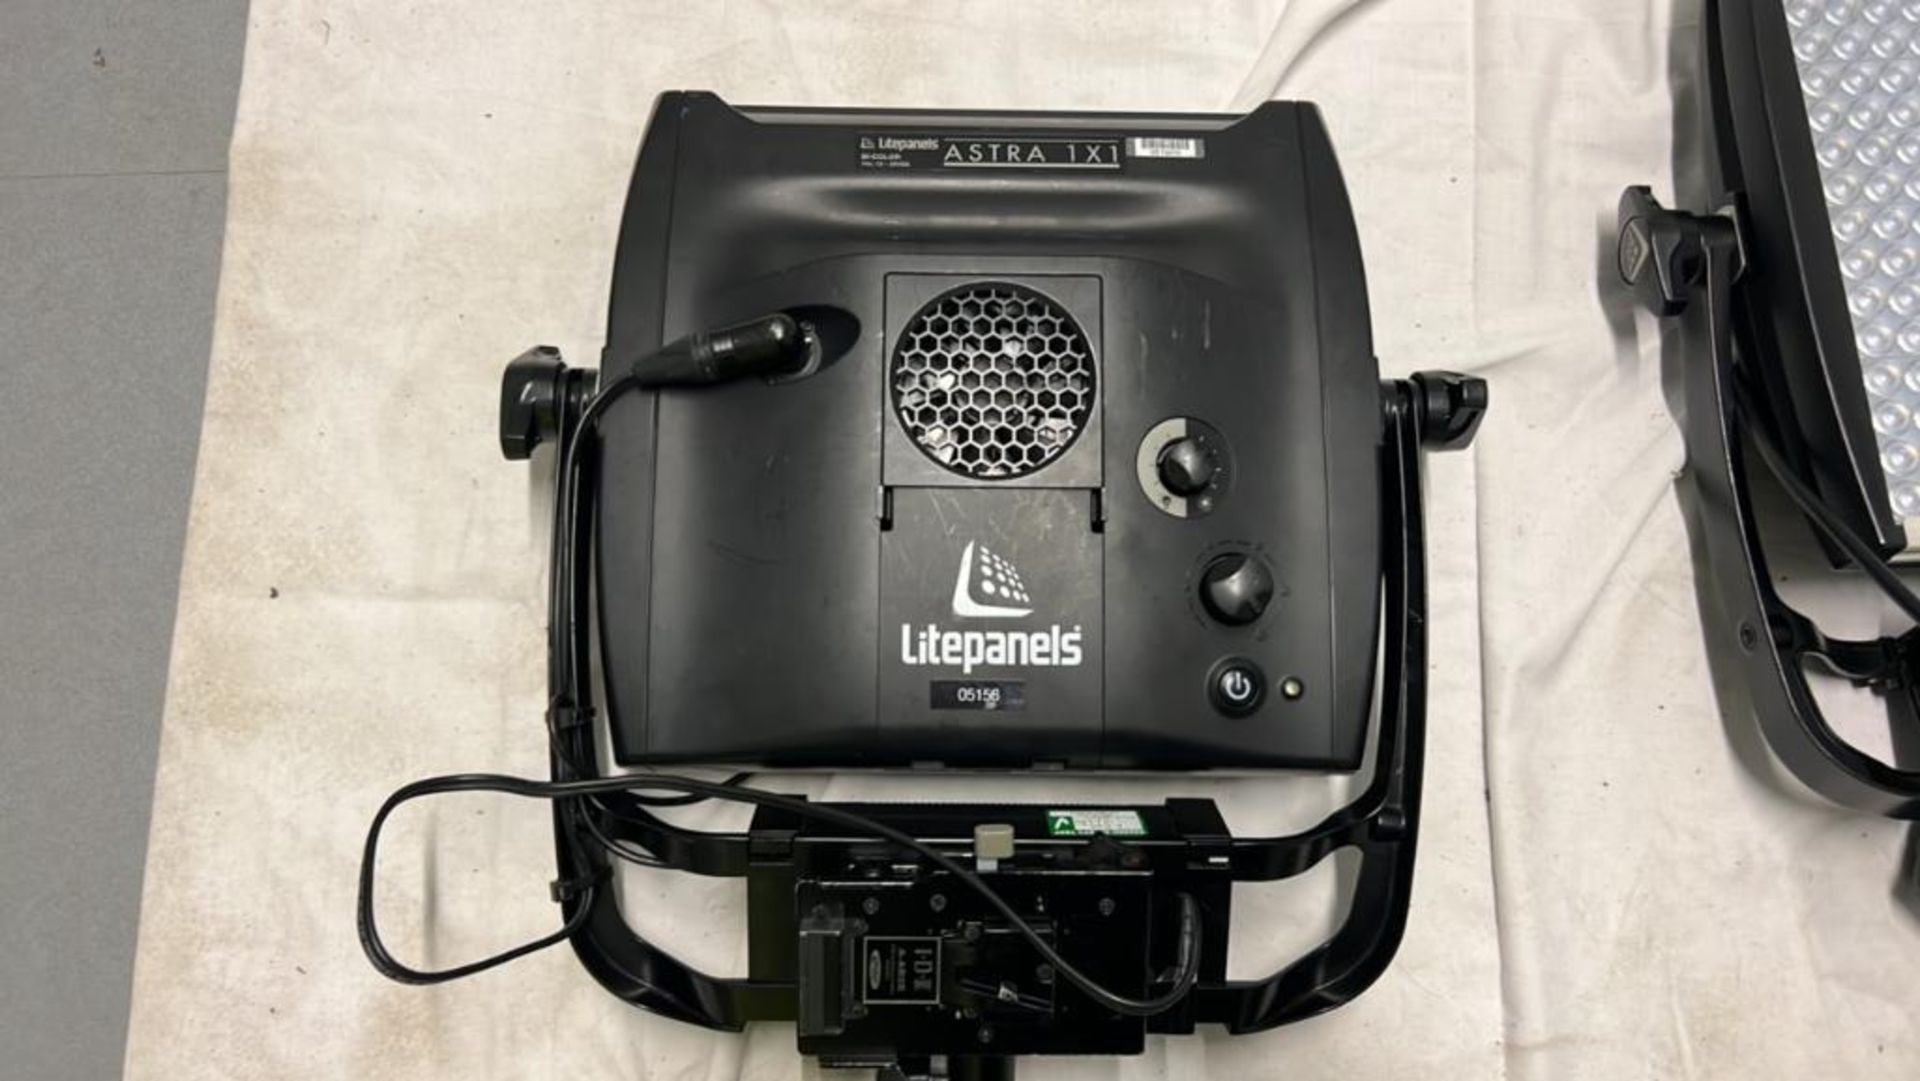 (2) Litepanels Astra 1x1 Bi-Color With carry bagLitepanels SN 1037405156, SN 1037405844 - Image 4 of 8